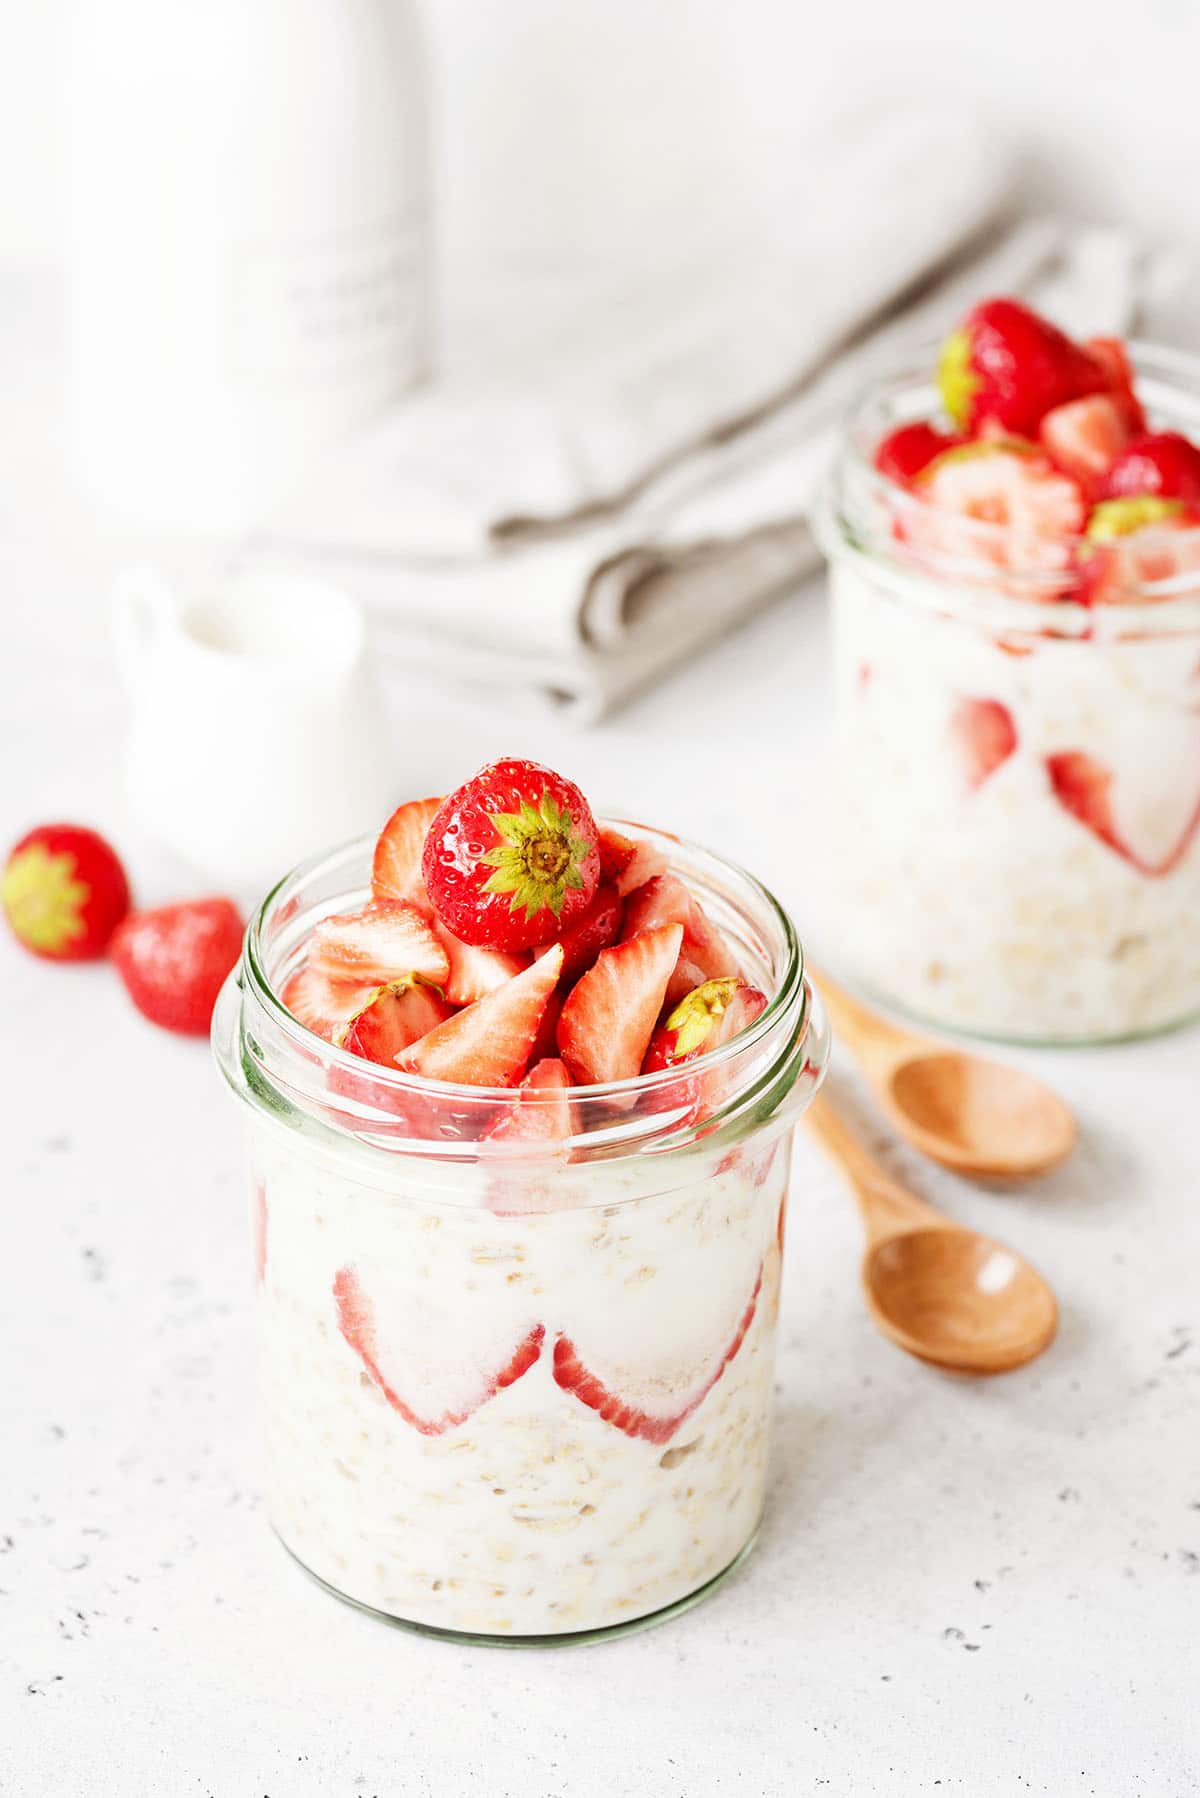 healthy strawberry overnight oats in a mason jar with wooden spoons and another mason jar in the background